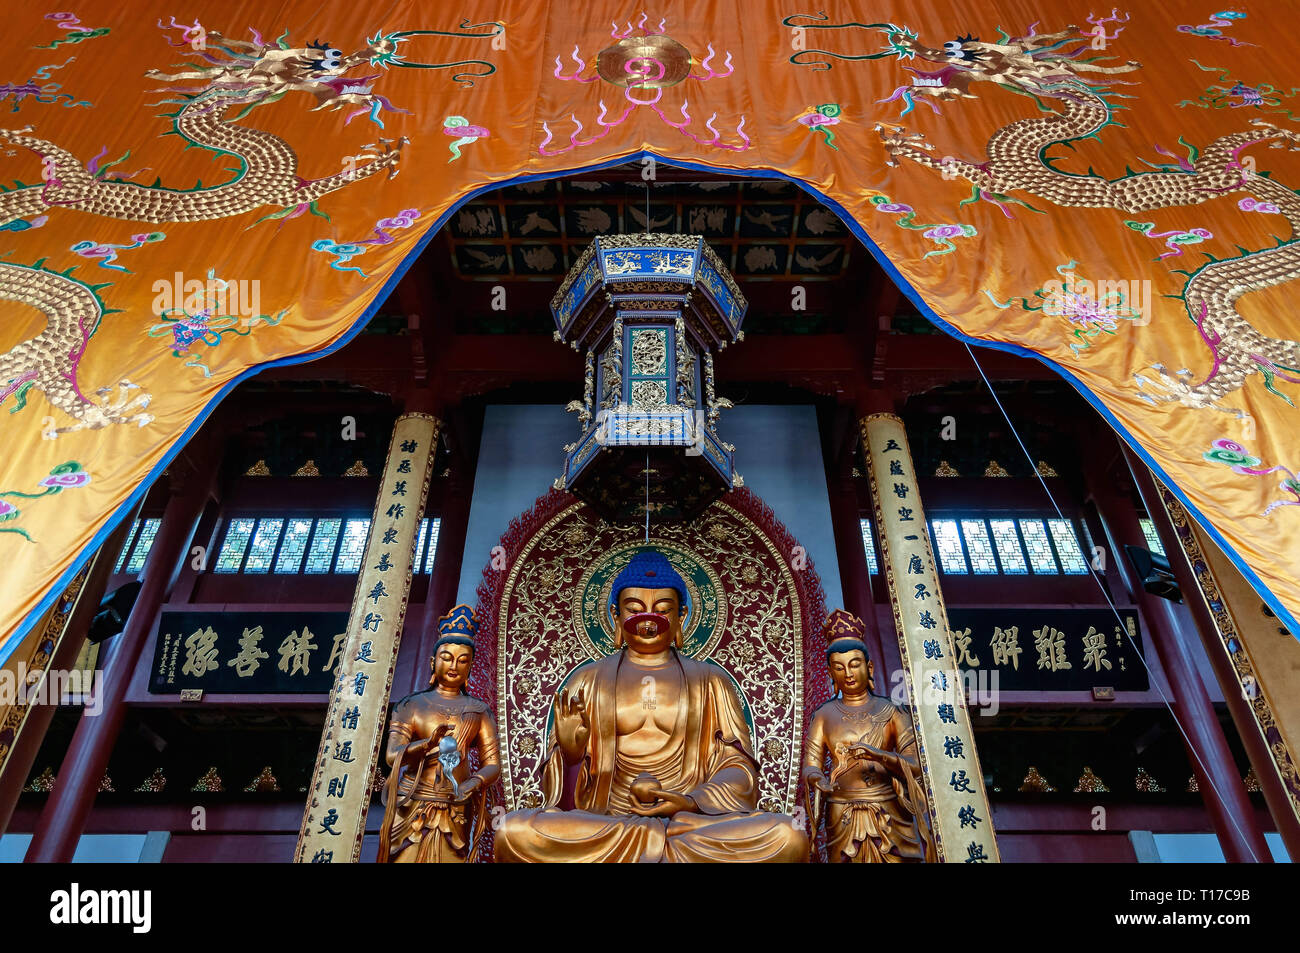 Hangzhou, China - August 14, 2011: View of Buddha statues inside Lingyin Temple. This temple is one of the most famous and visited spot of the city Stock Photo